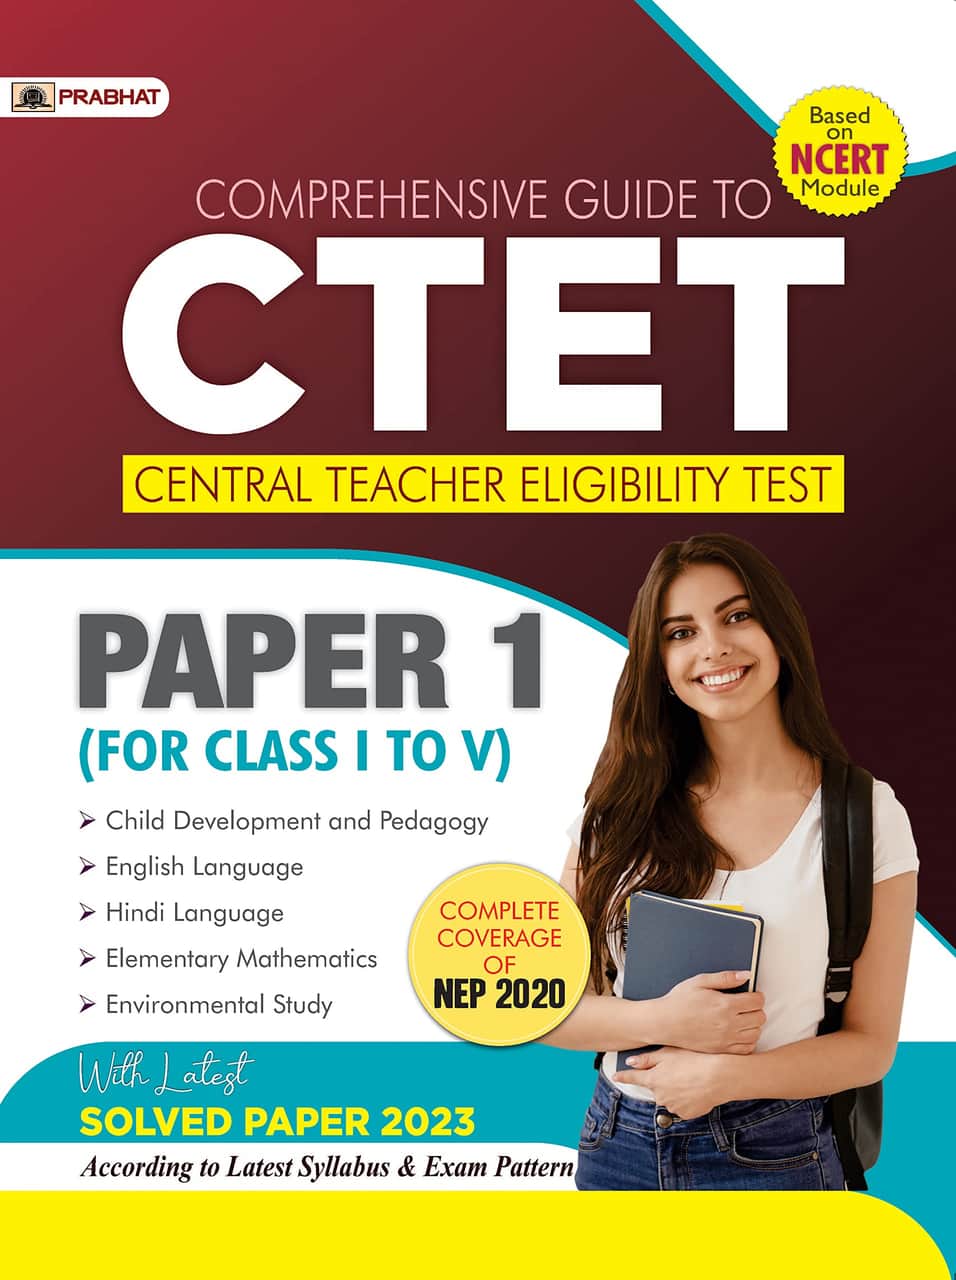 Comprehensive Guide To CTET Central Teacher Eligibility Test Paper-1 (...